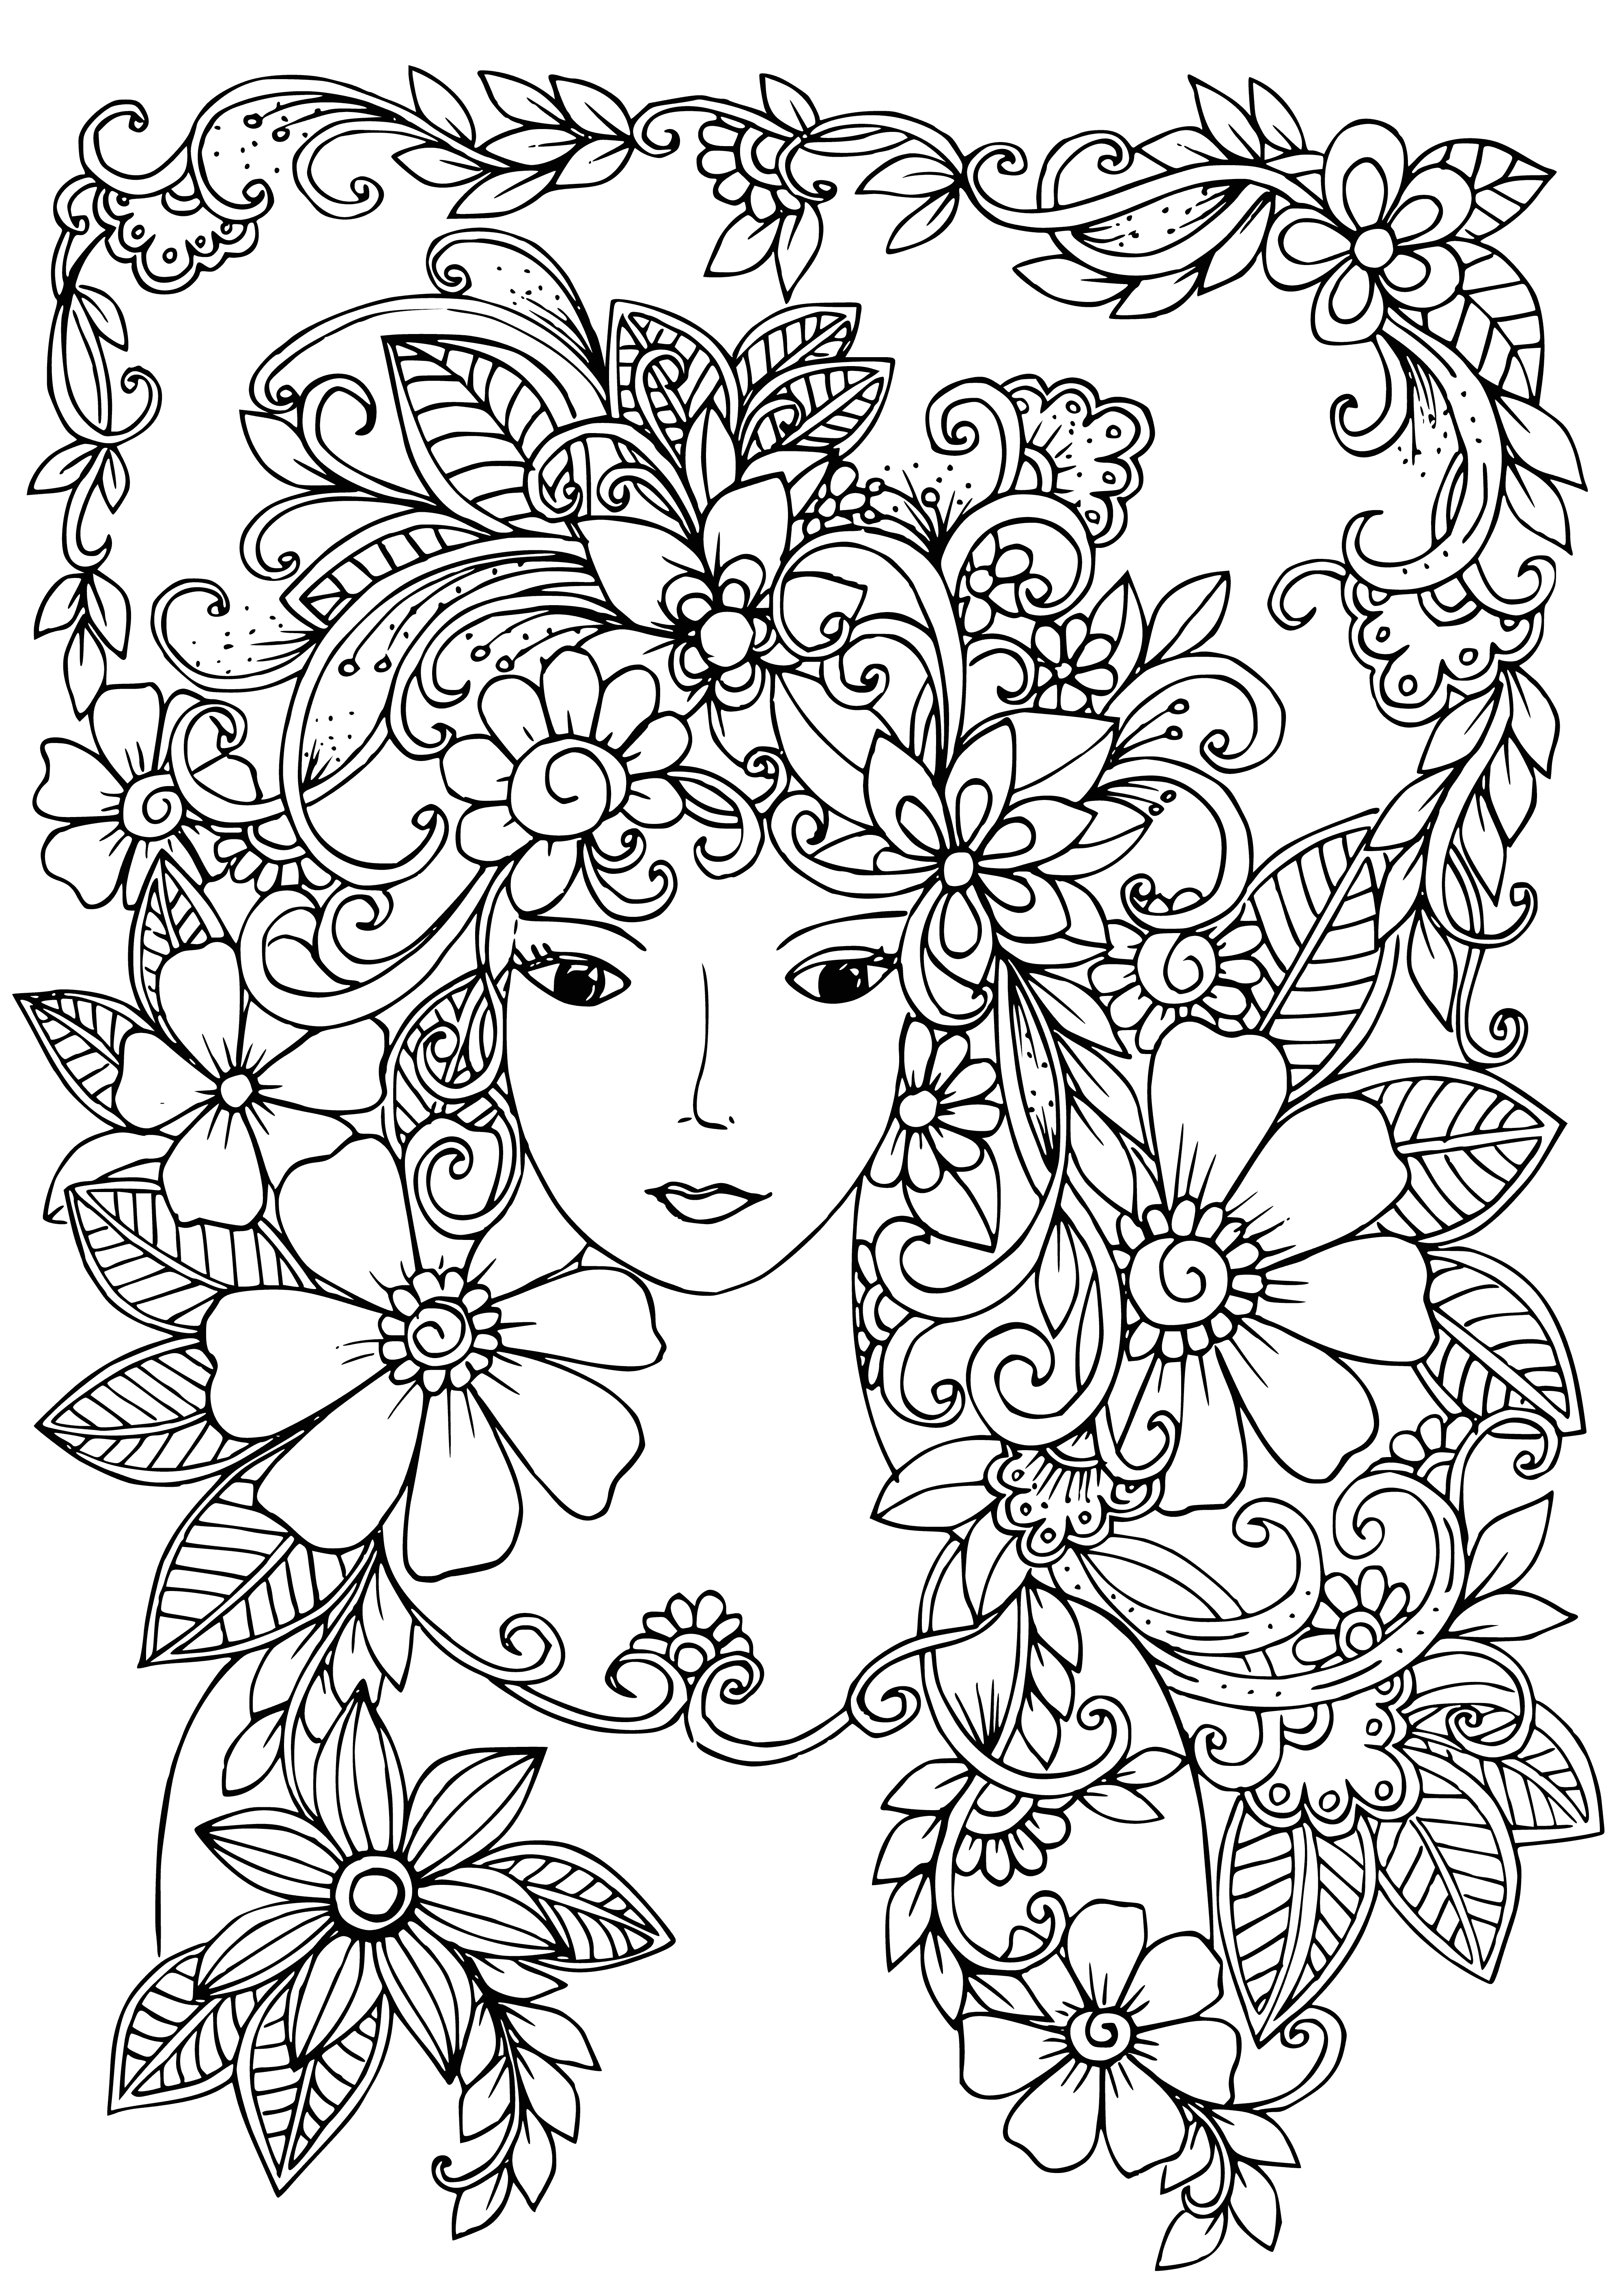 coloring page: Girl stands in a field of flowers, wearing a dress with a bow in hair. Holding a basket of flowers.